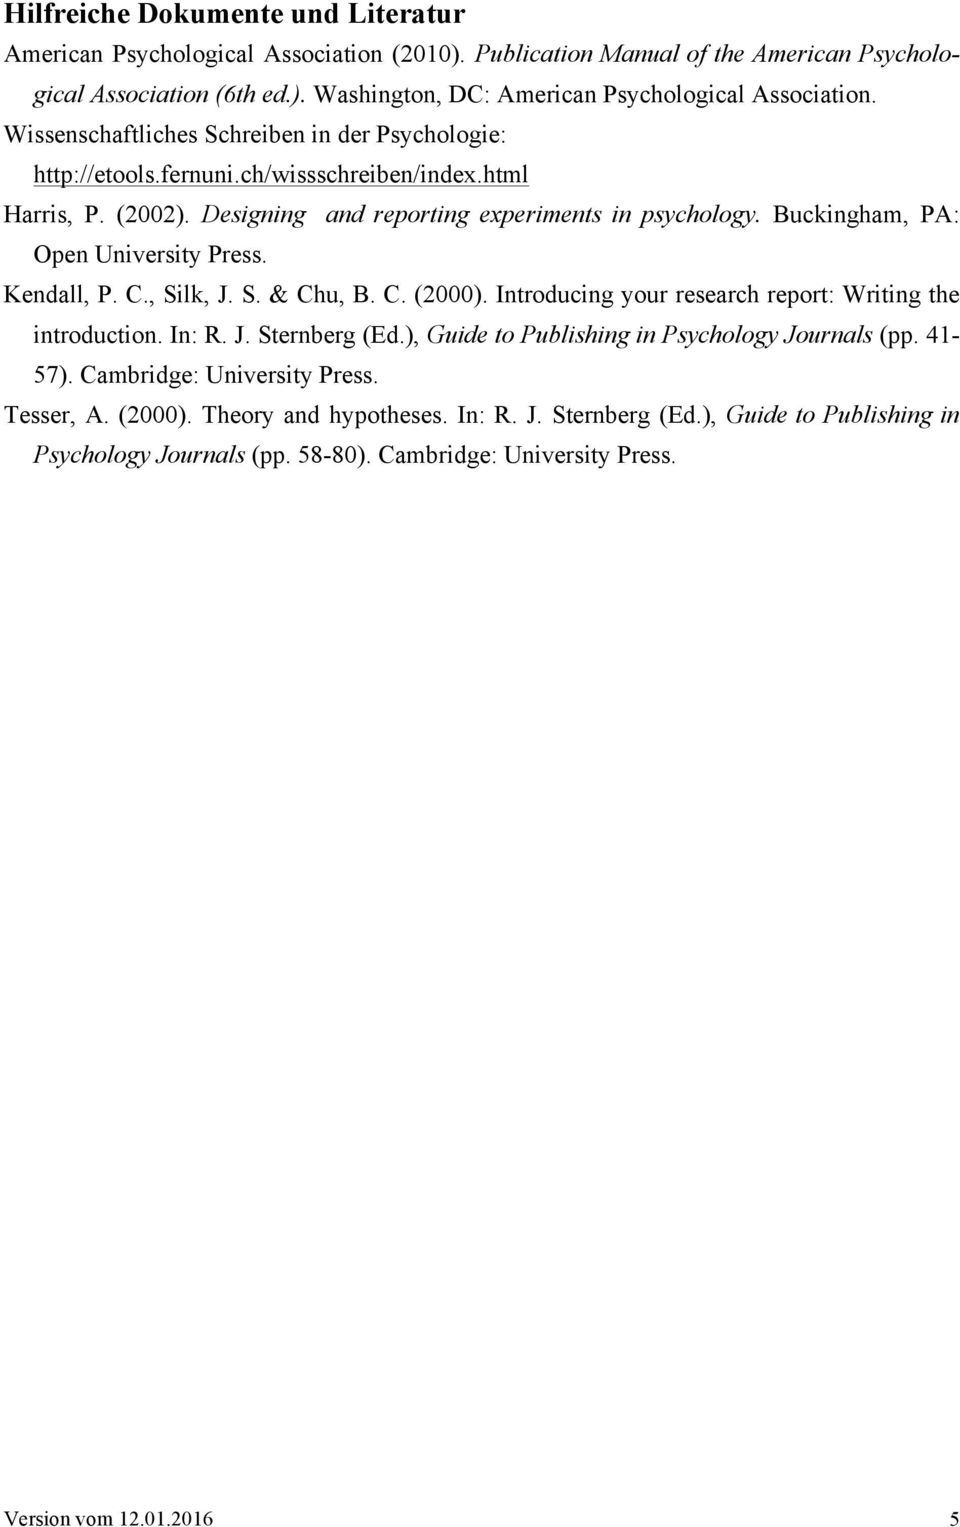 Buckingham, PA: Open University Press. Kendall, P. C., Silk, J. S. & Chu, B. C. (2000). Introducing your research report: Writing the introduction. In: R. J. Sternberg (Ed.